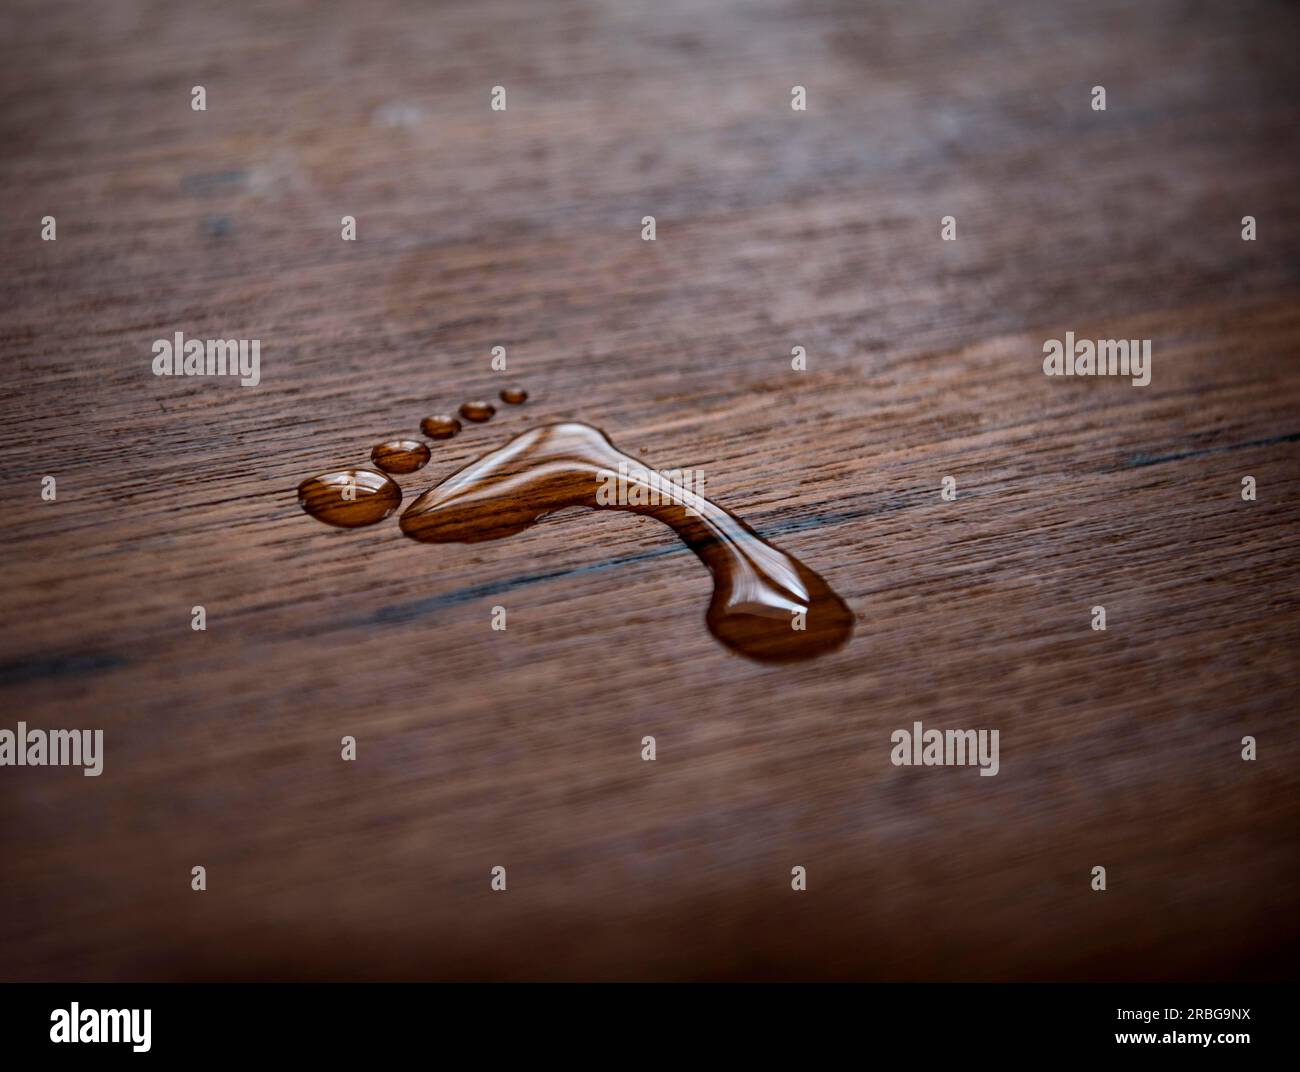 Barefoot Water Drops Stock Photo